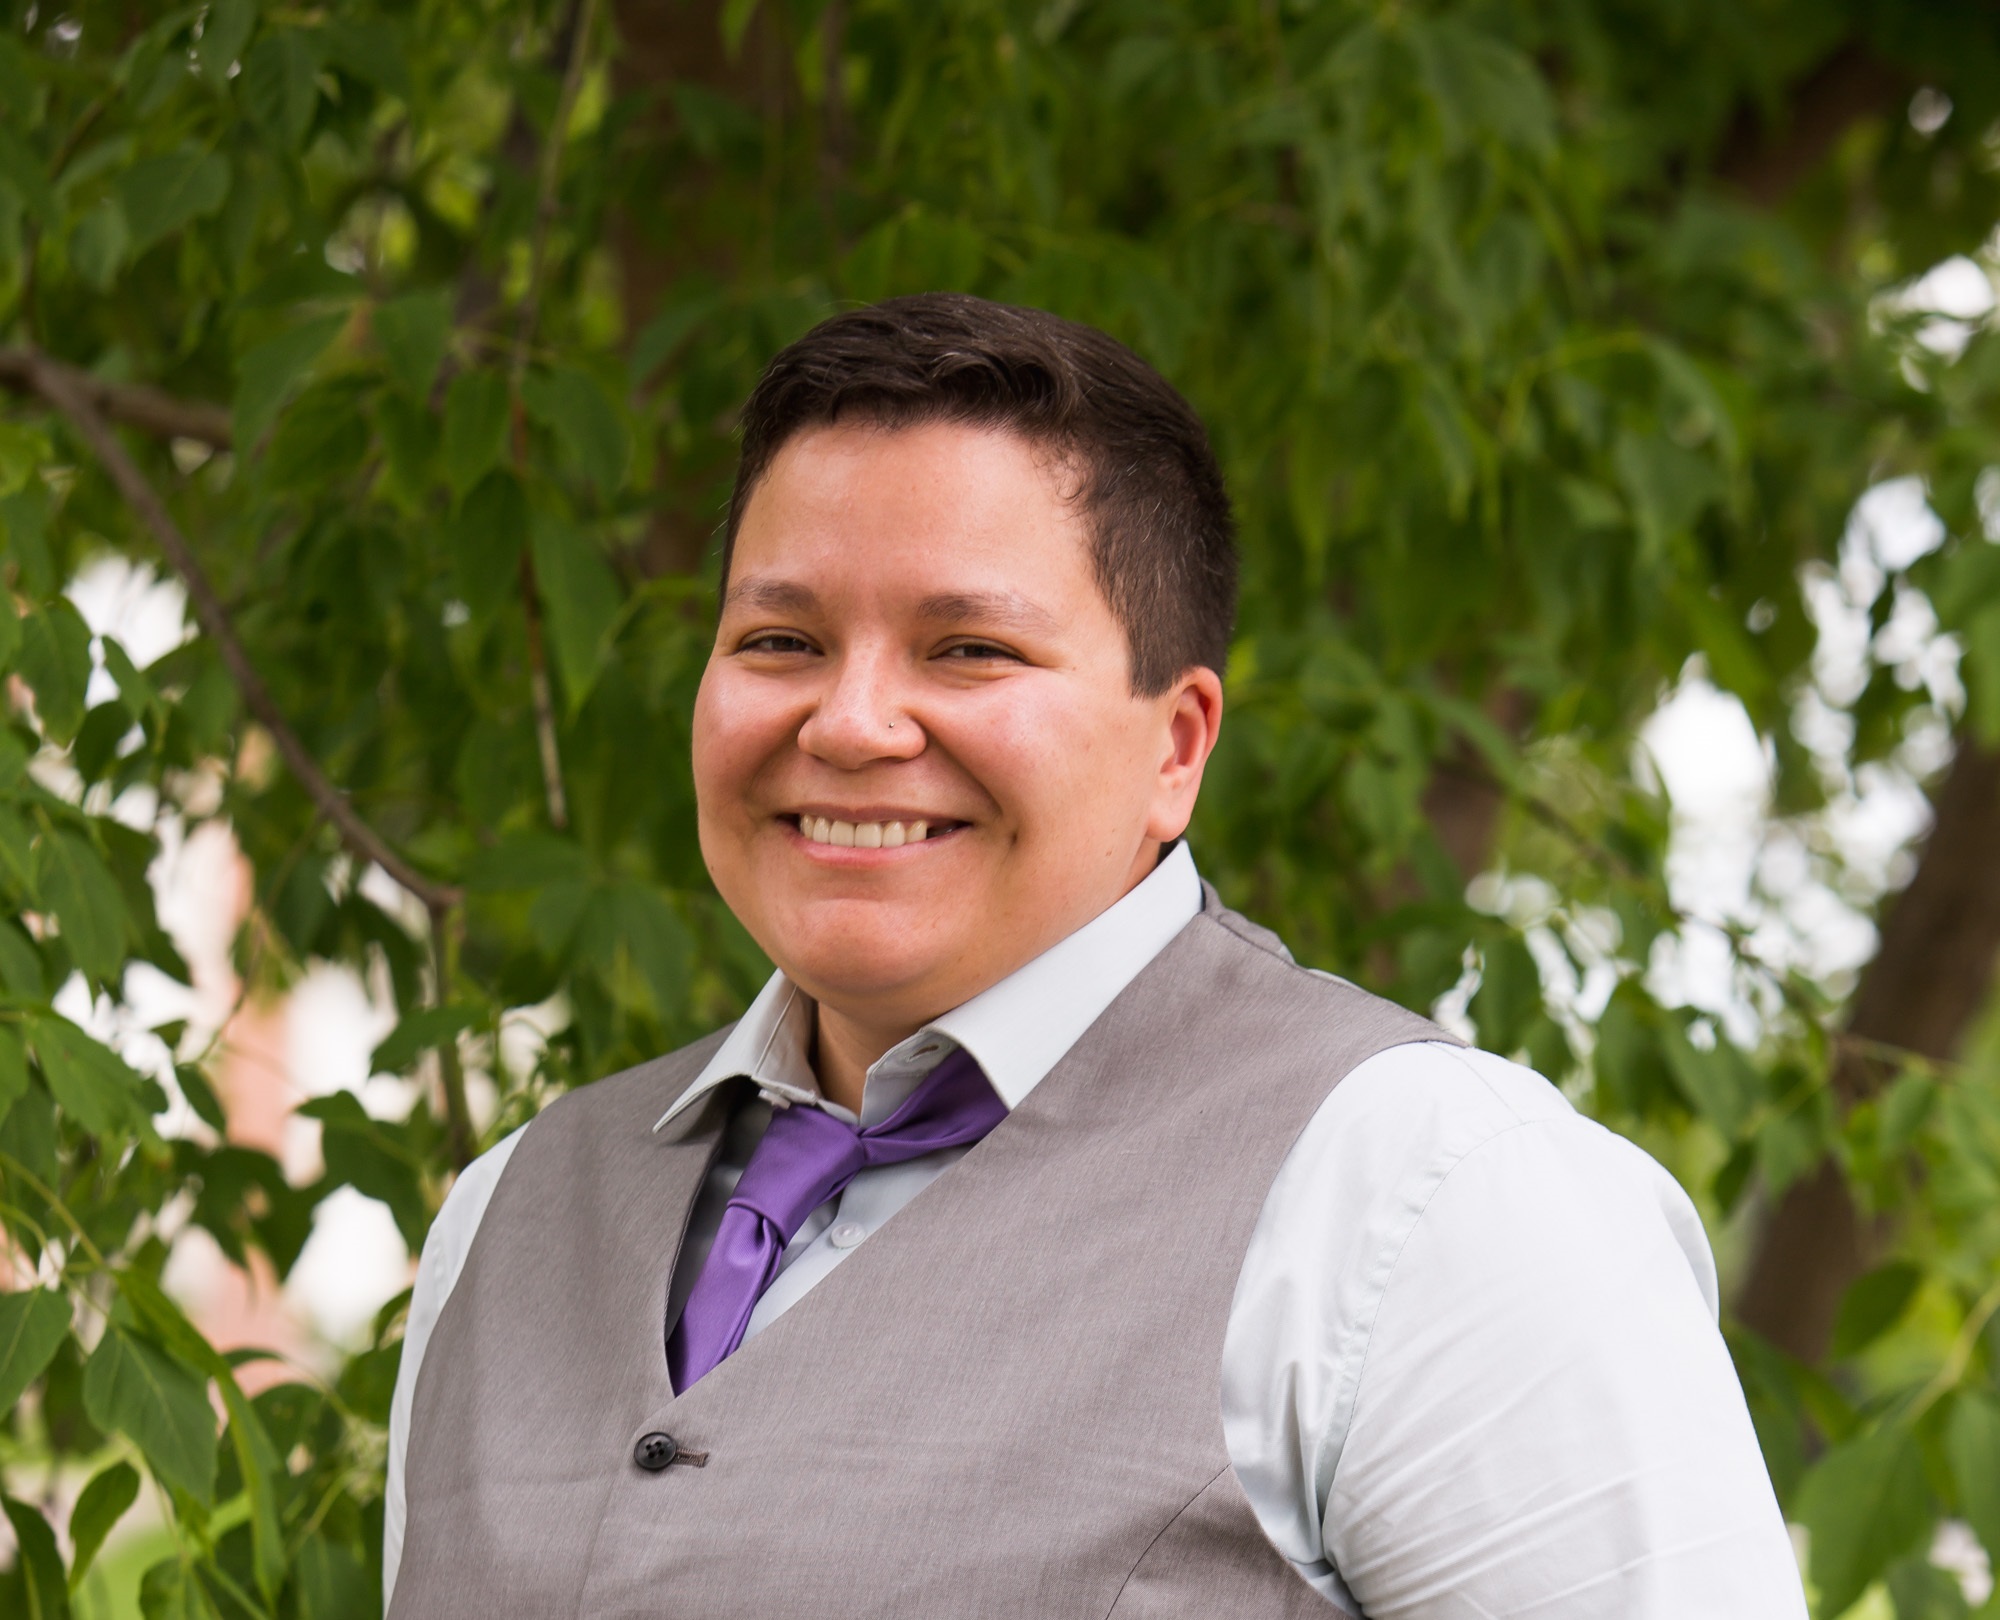 Tegra Myanna will begin their new role as director of the LGBTQIA Resource Center on May 11.